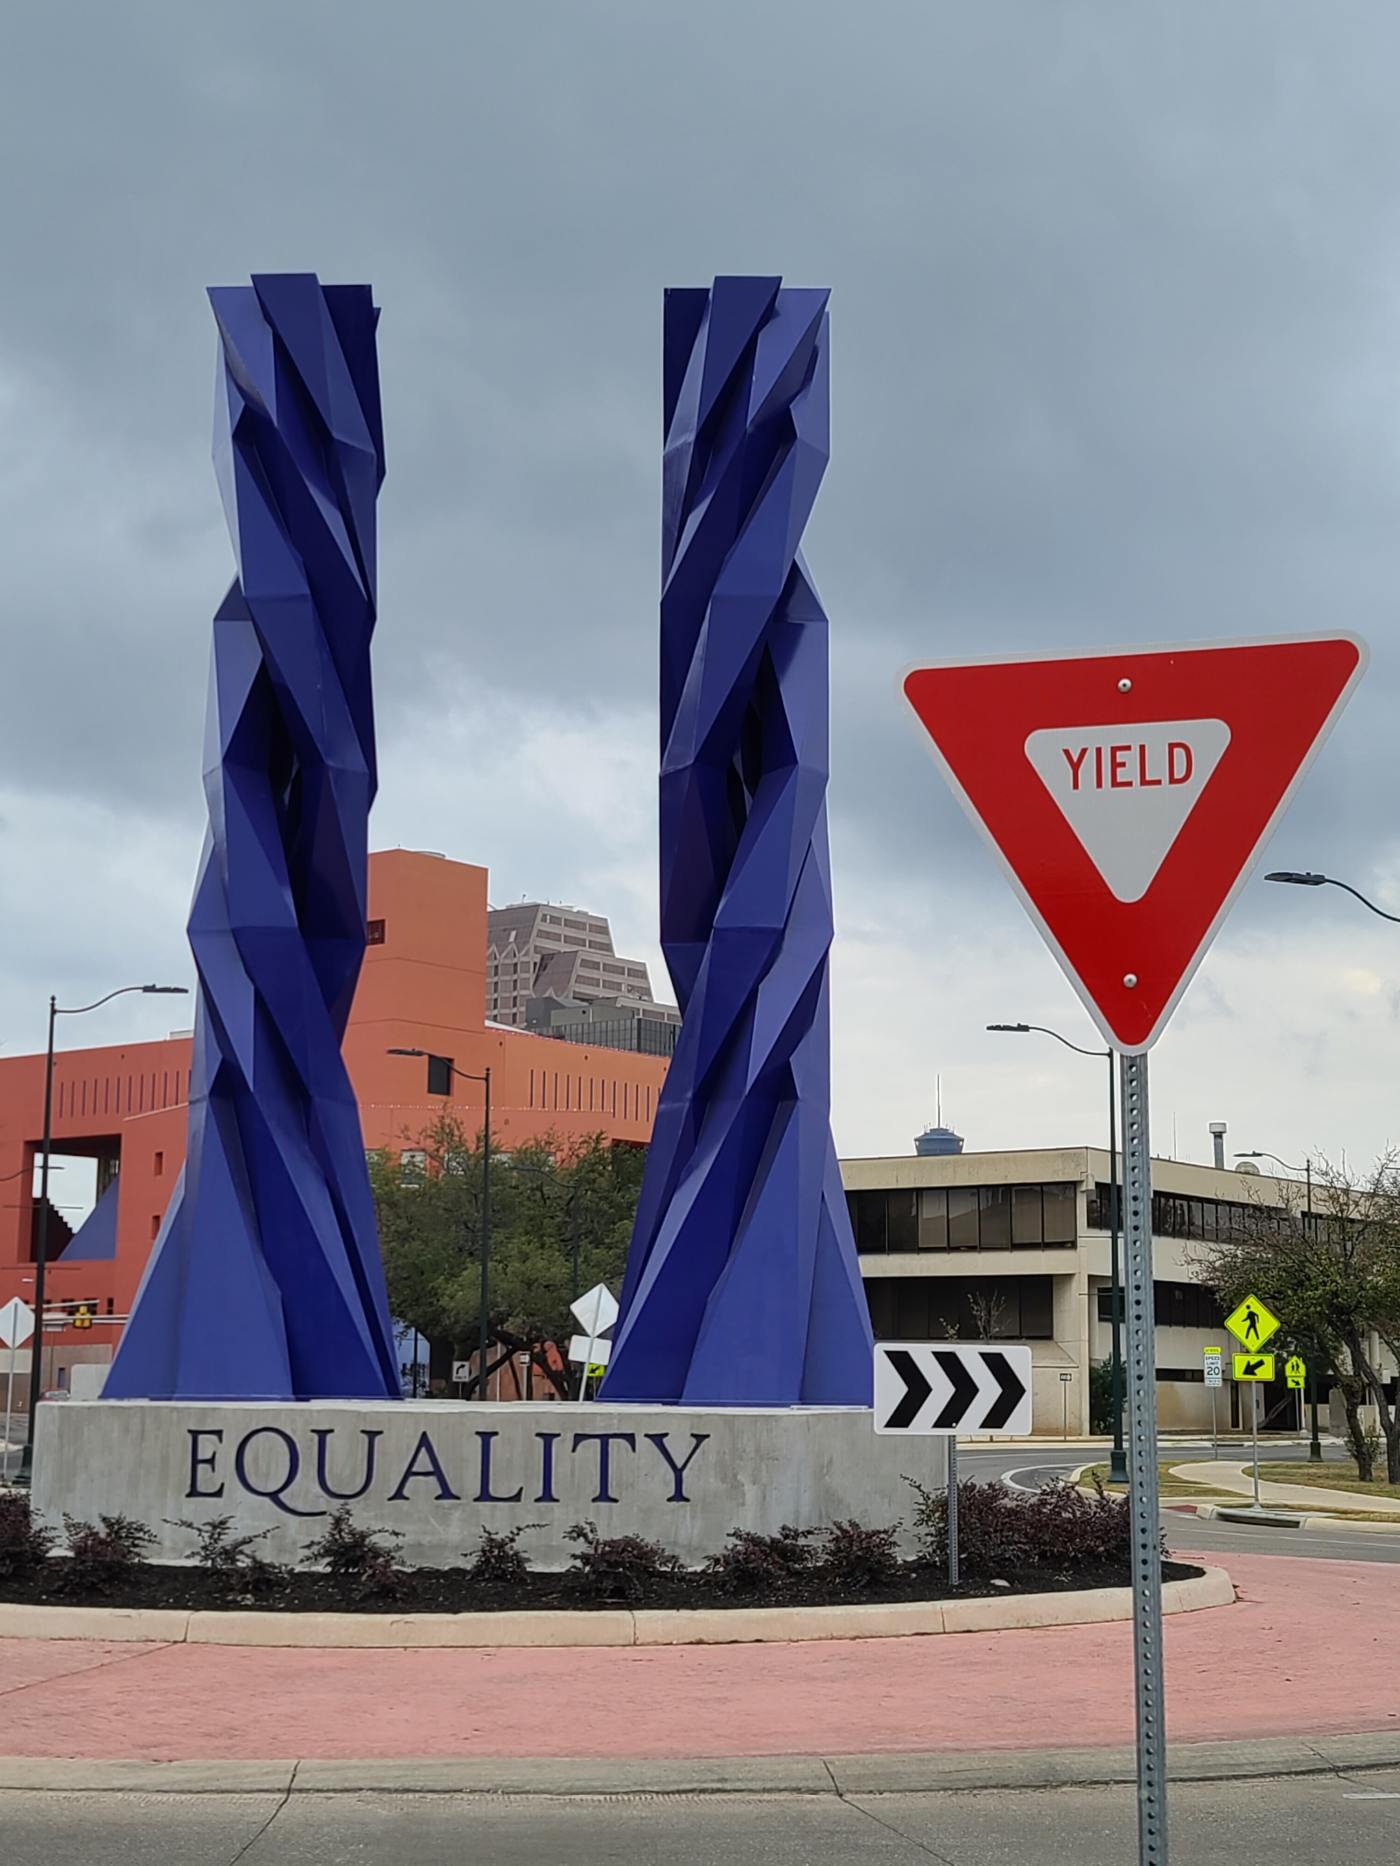 A yield sign next to an equality sculpture